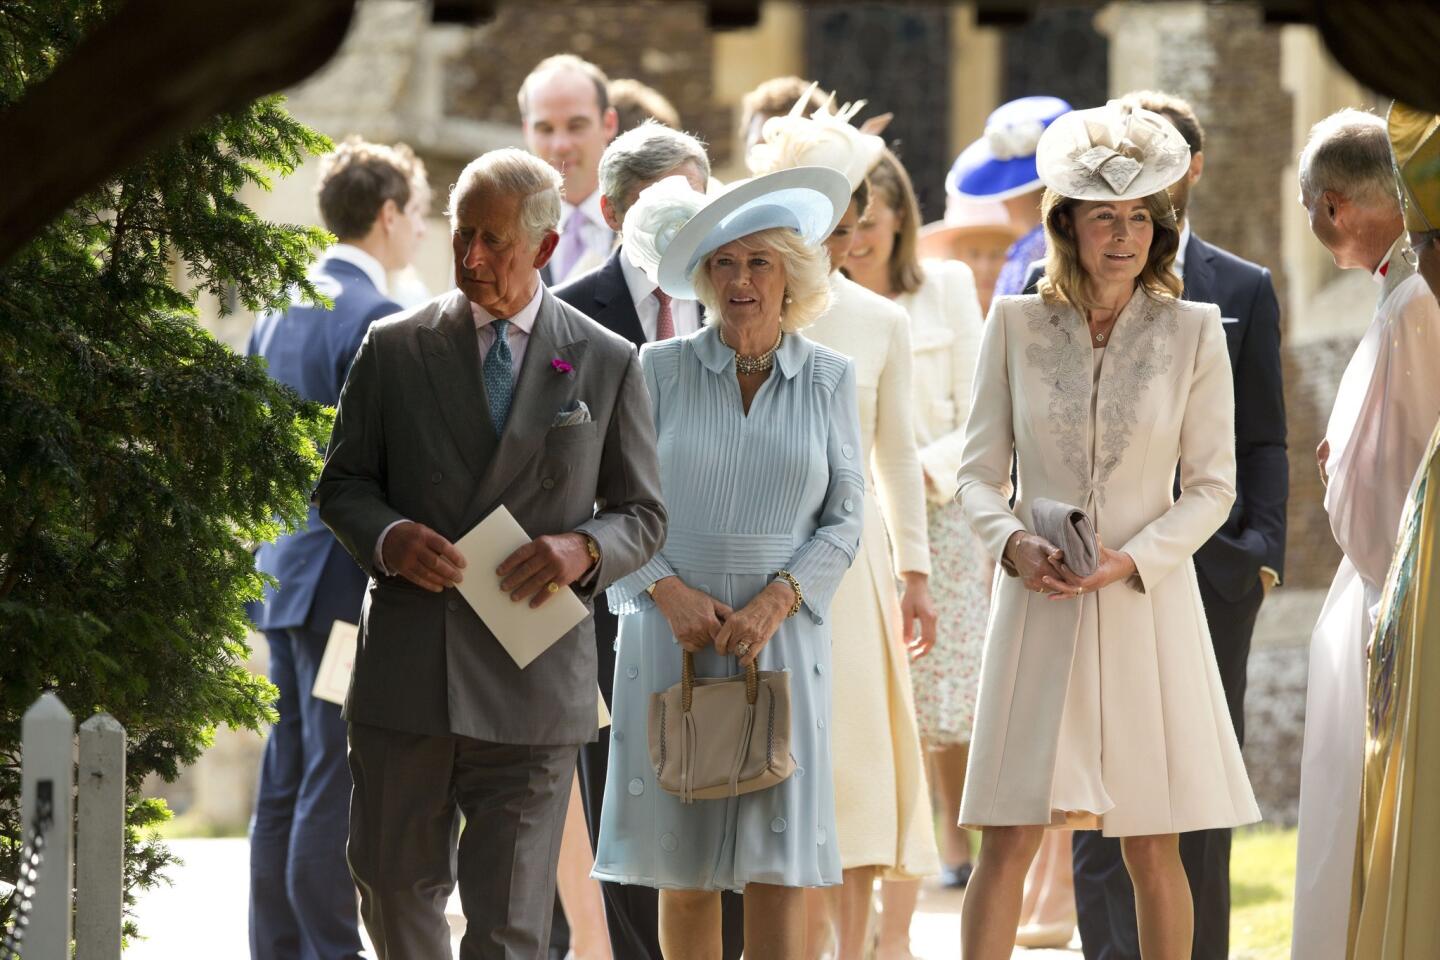 Britain's Camilla the Duchess of Cornwall, center, walks with her husband Prince Charles, left, and Kate the Duchess of Cambridge's mother Carole, right, as they leave after attending the Christening of Britain's Princess Charlotte at St. Mary Magdalene Church in Sandringham, England, Sunday, July 5, 2015.